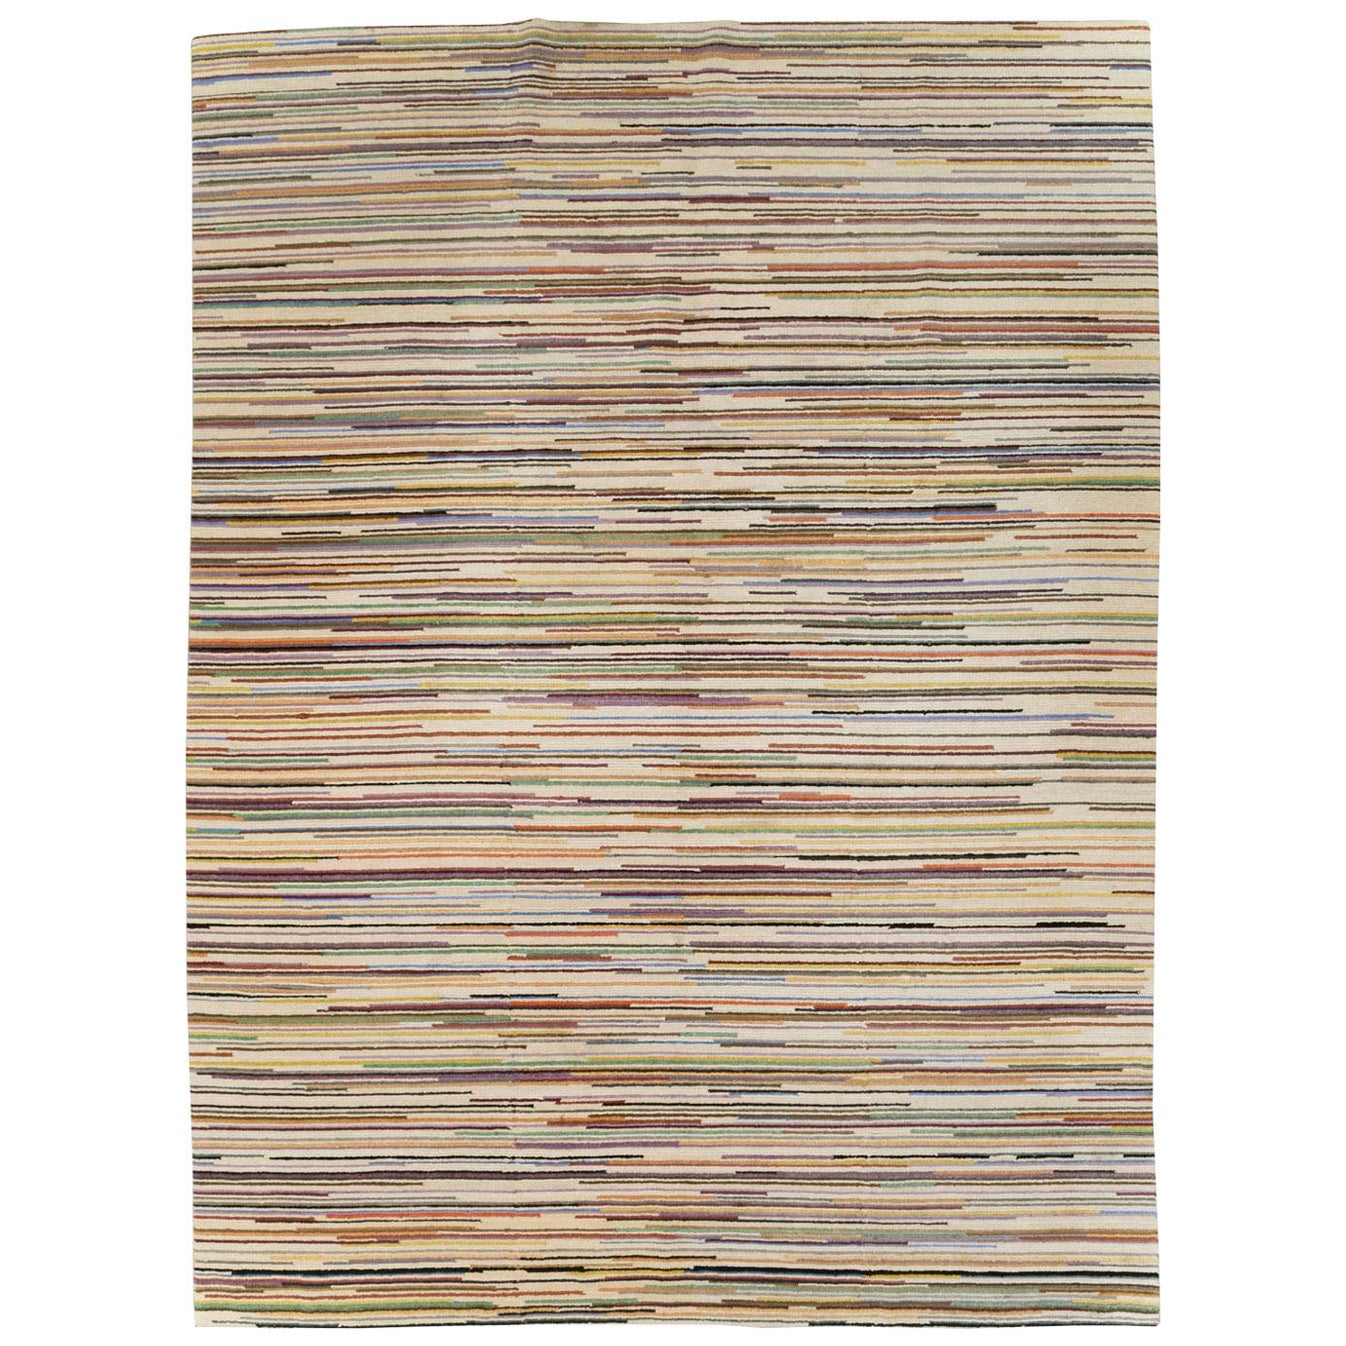 Galerie Shabab Collection Contemporary Handmade Turkish Room Size Carpet